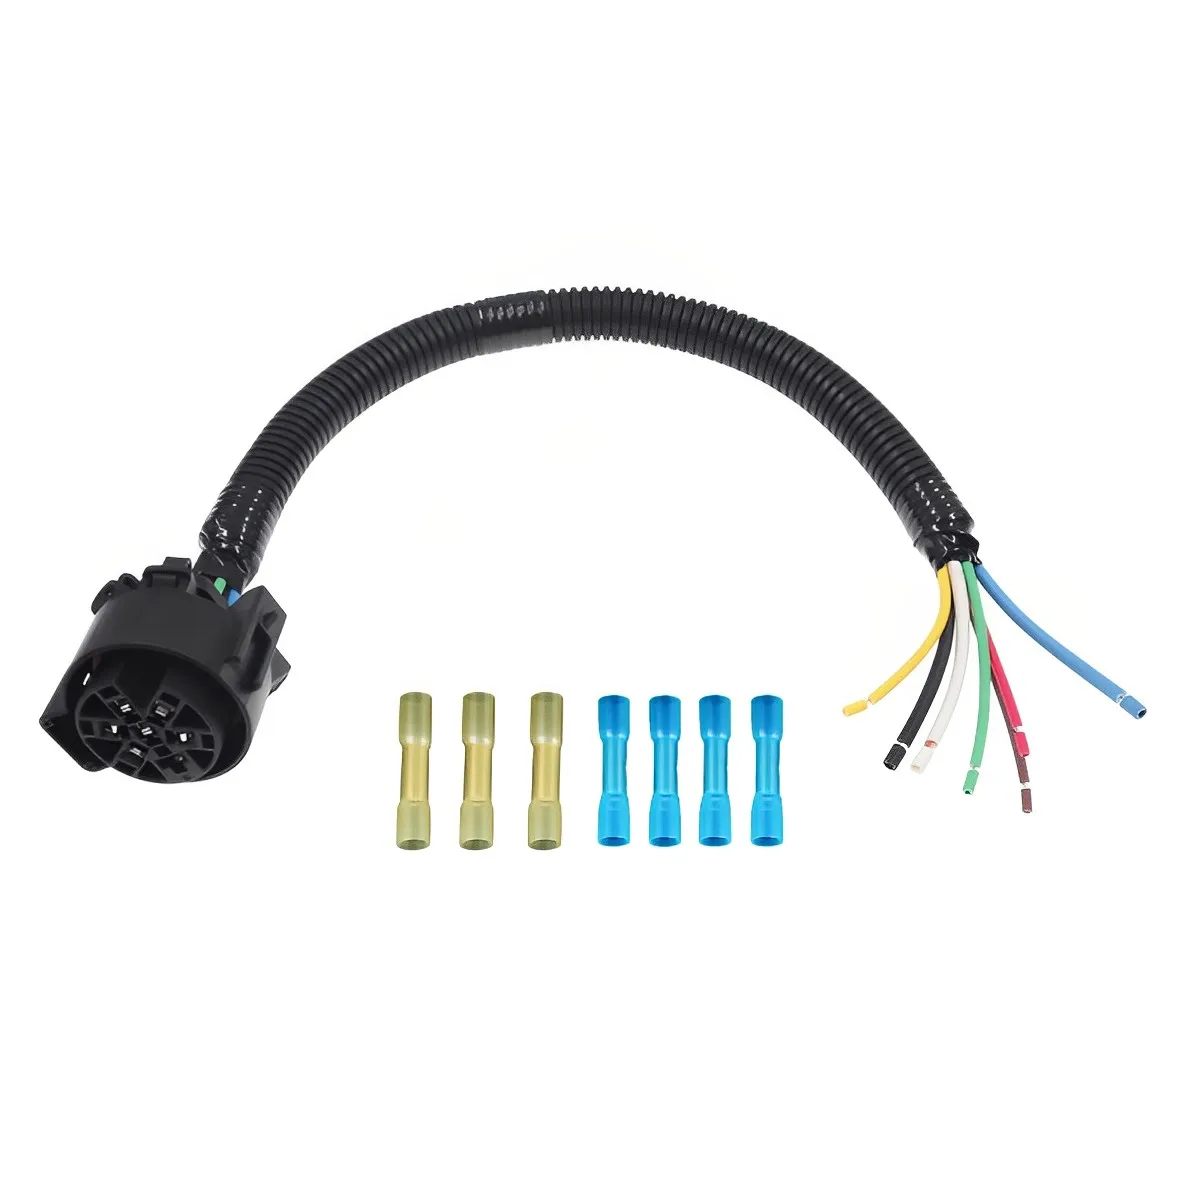 

7 Way 12V Trailer Wiring Harness for Commercial Vehicle / Semi - trailer / Trailer with Heat Shrinkable Pipe Restraining Strap